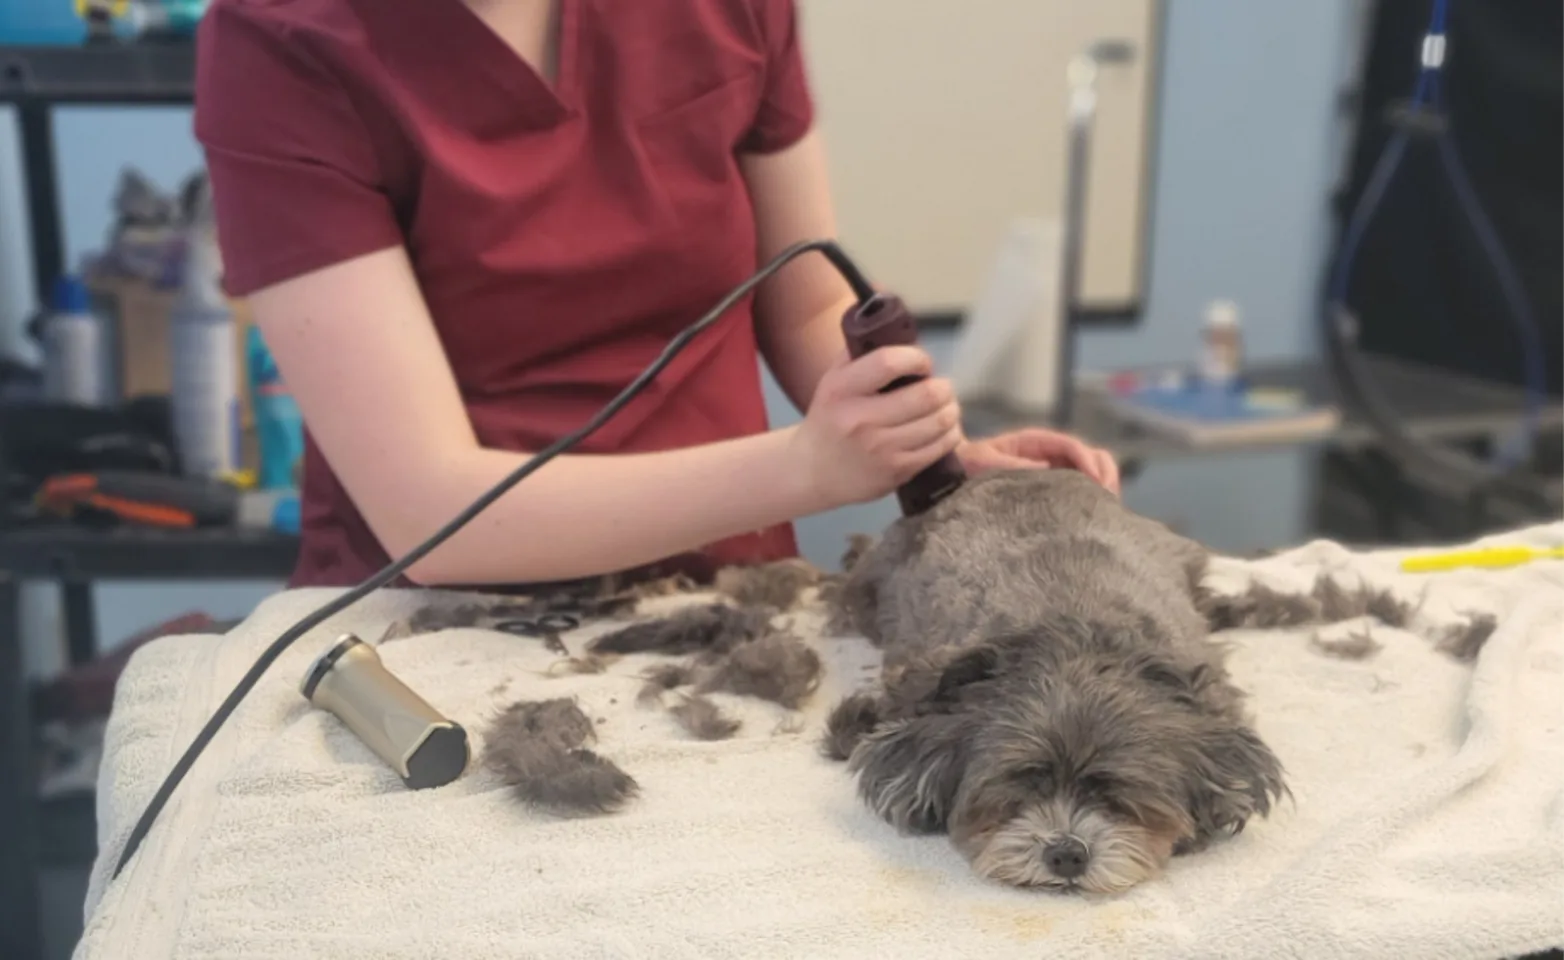 Staff member dressed in red shaving a small gray dog on a table